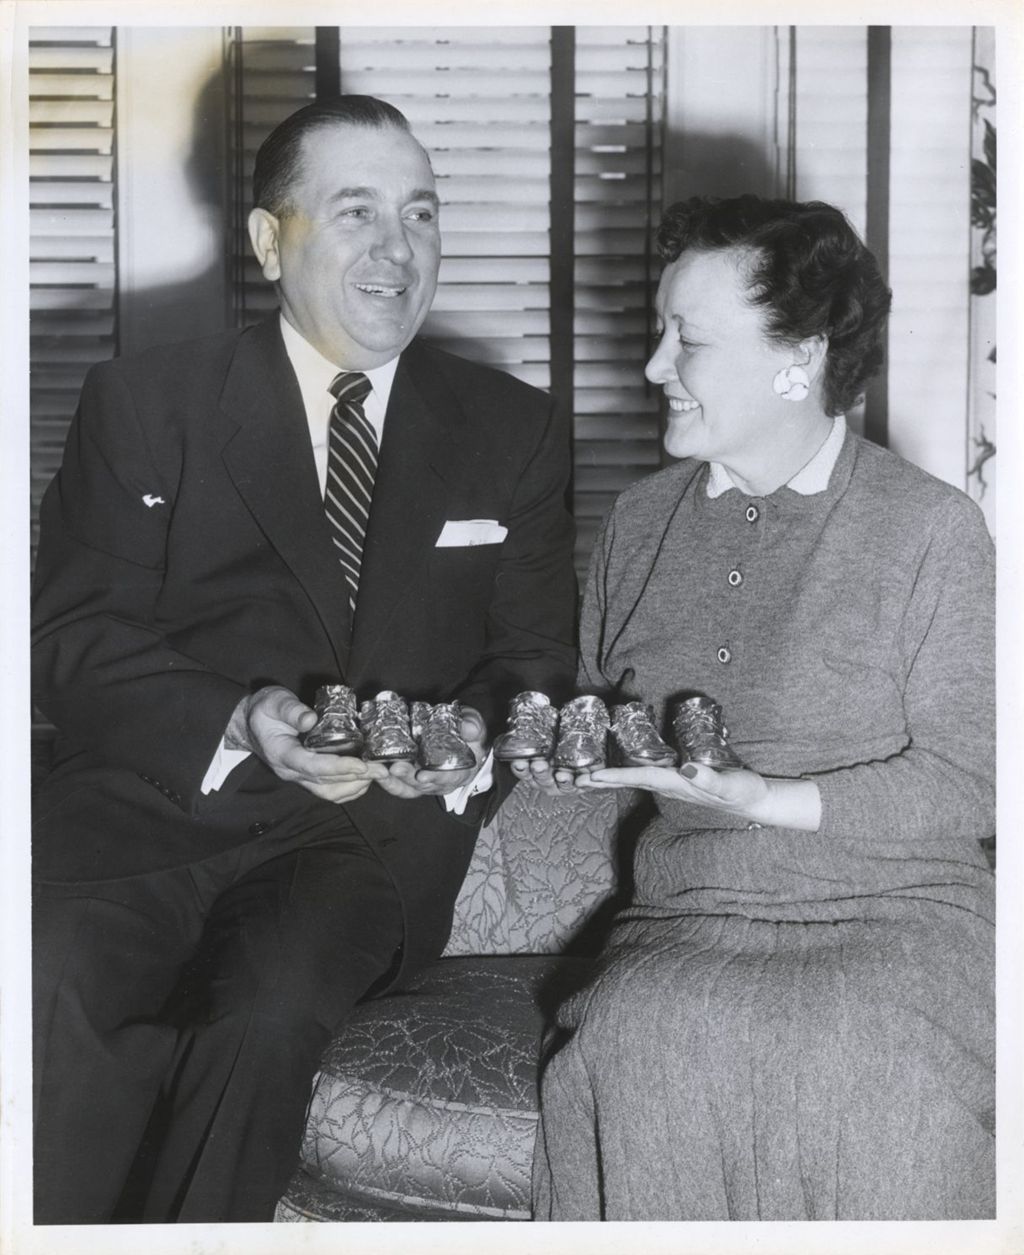 Miniature of Richard J. Daley and Eleanor Daley with bronzed baby booties